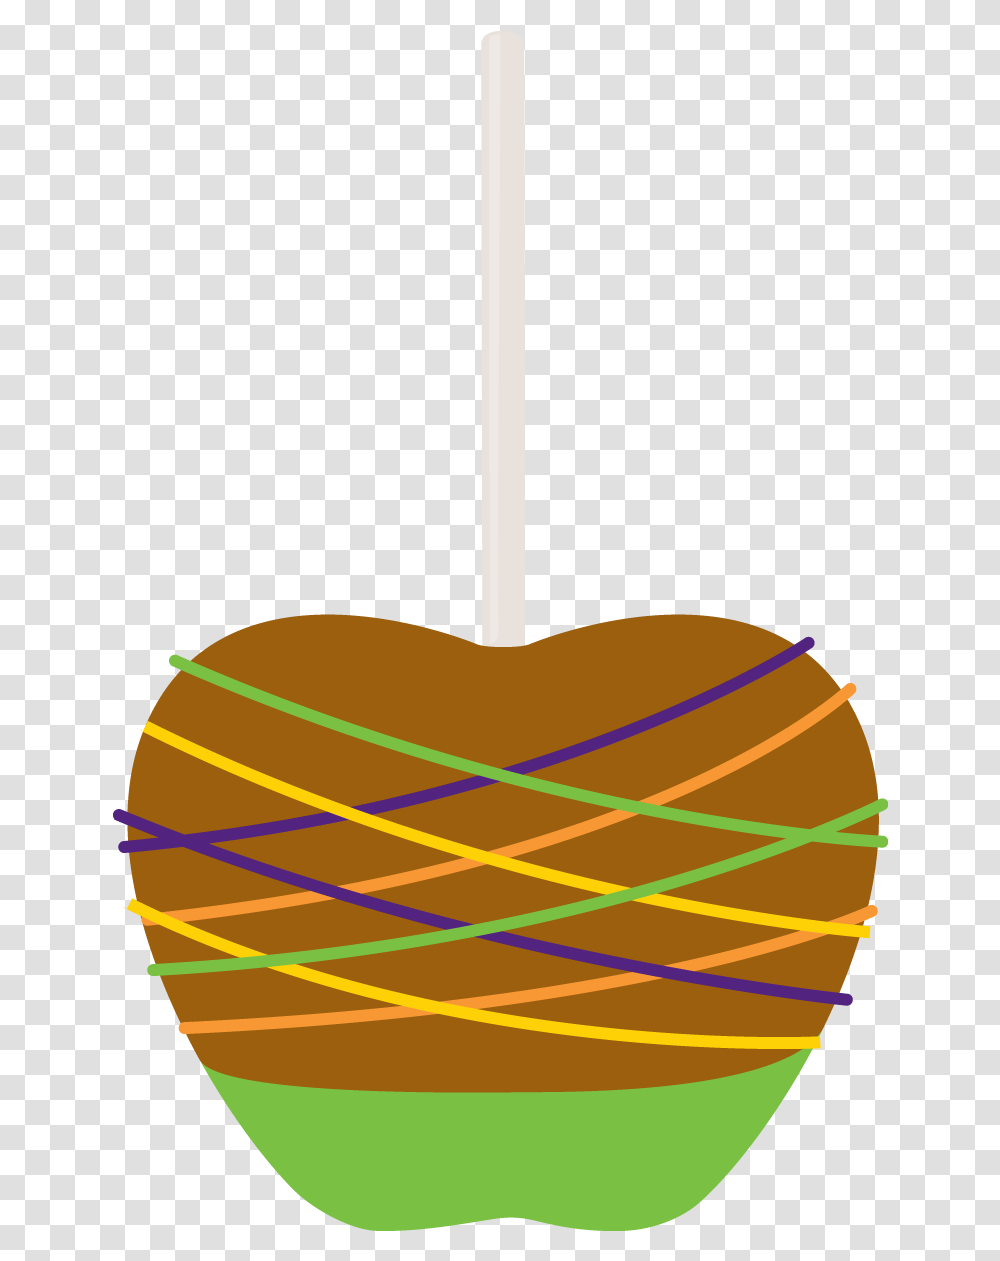 Halloween Candy Apples Clip Art, Ornament, Sweets, Food, Confectionery Transparent Png